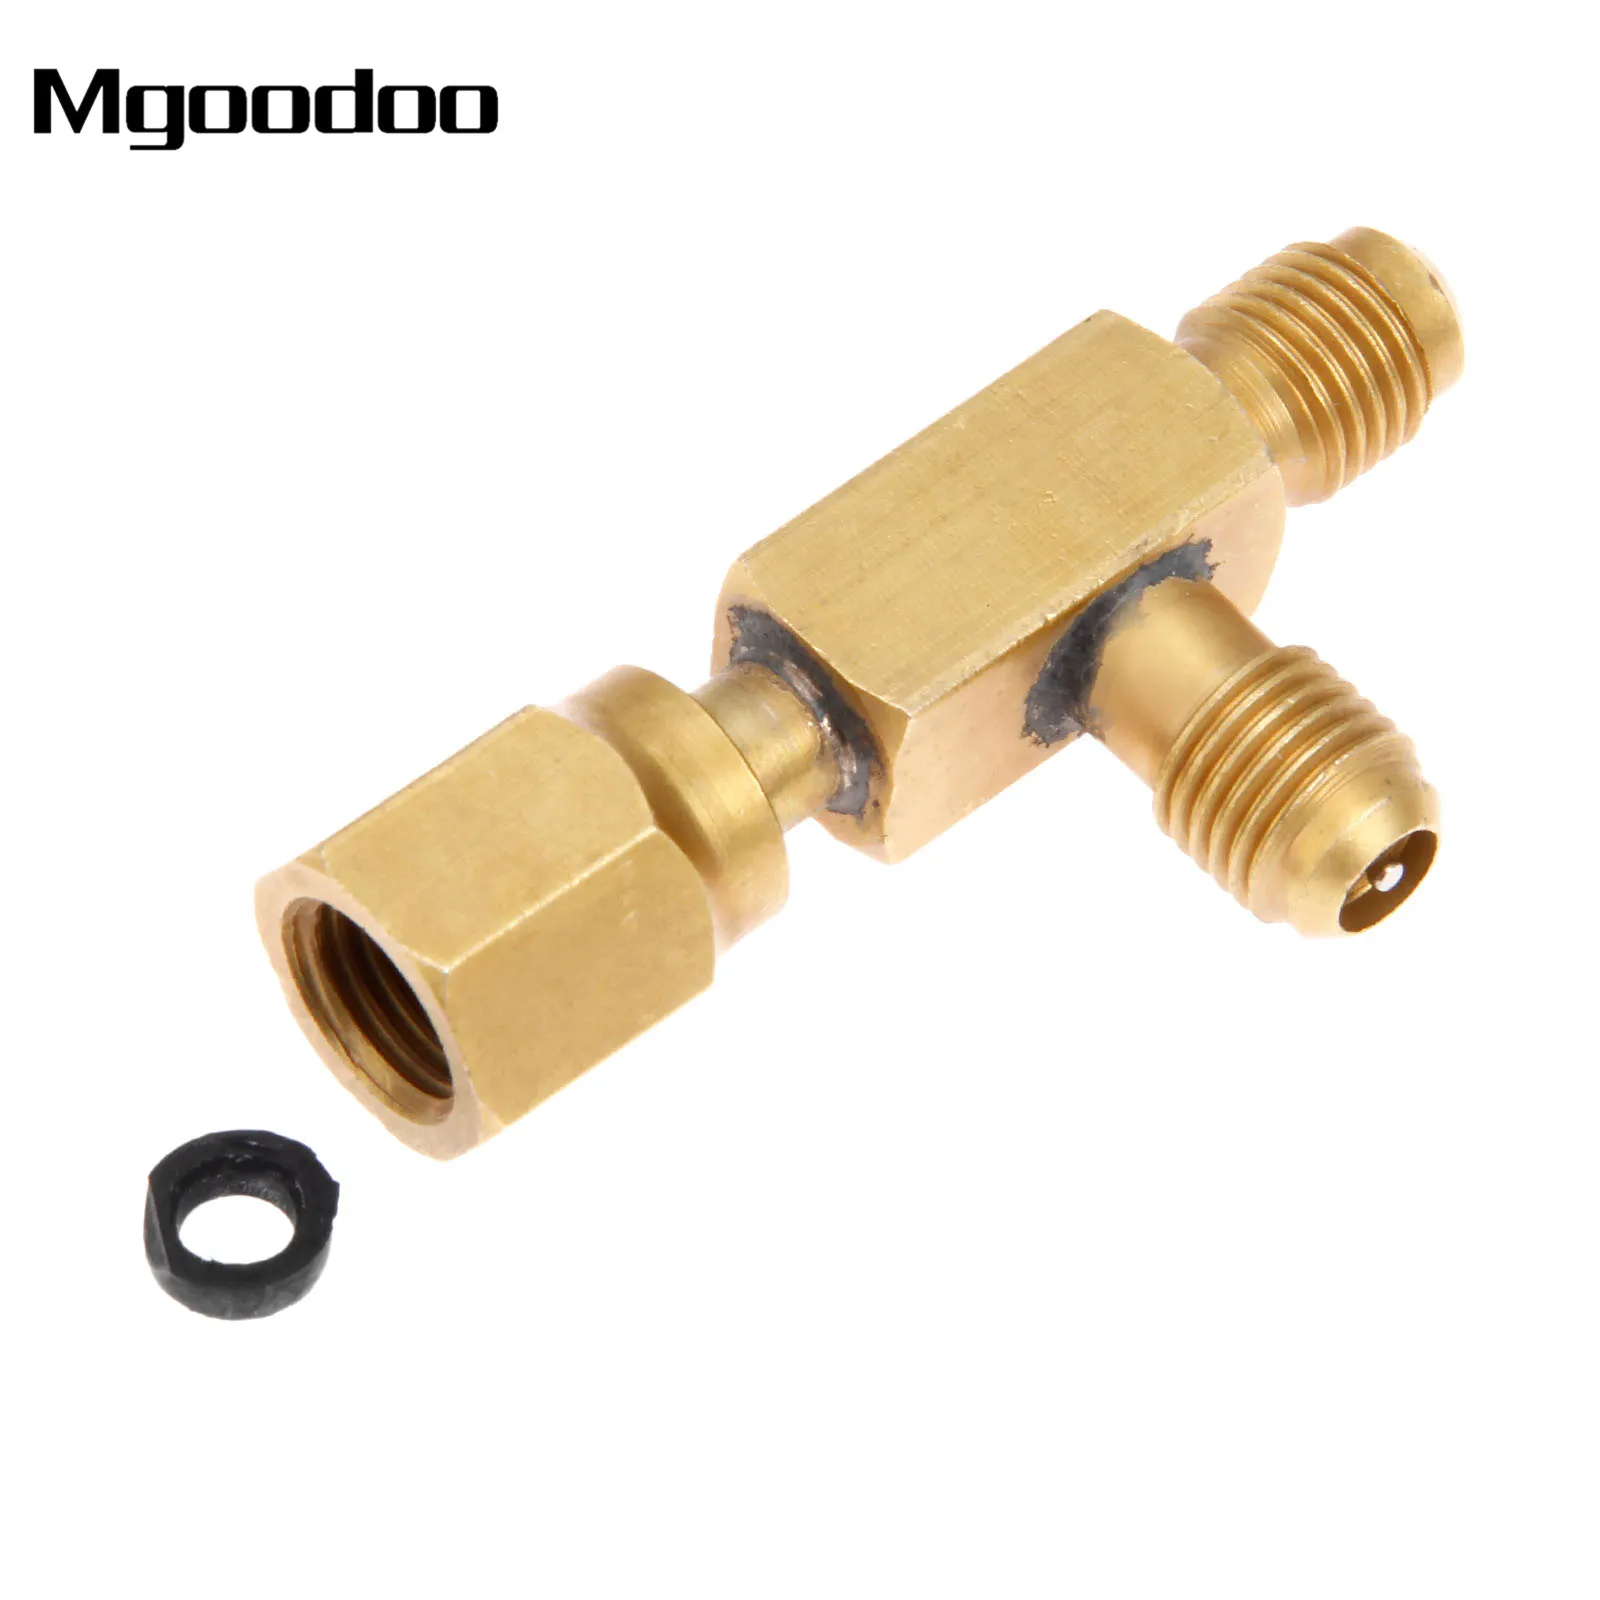 Mgoodoo Brass Tee Adapter Converter 1/4" Male And Female SAE Flare